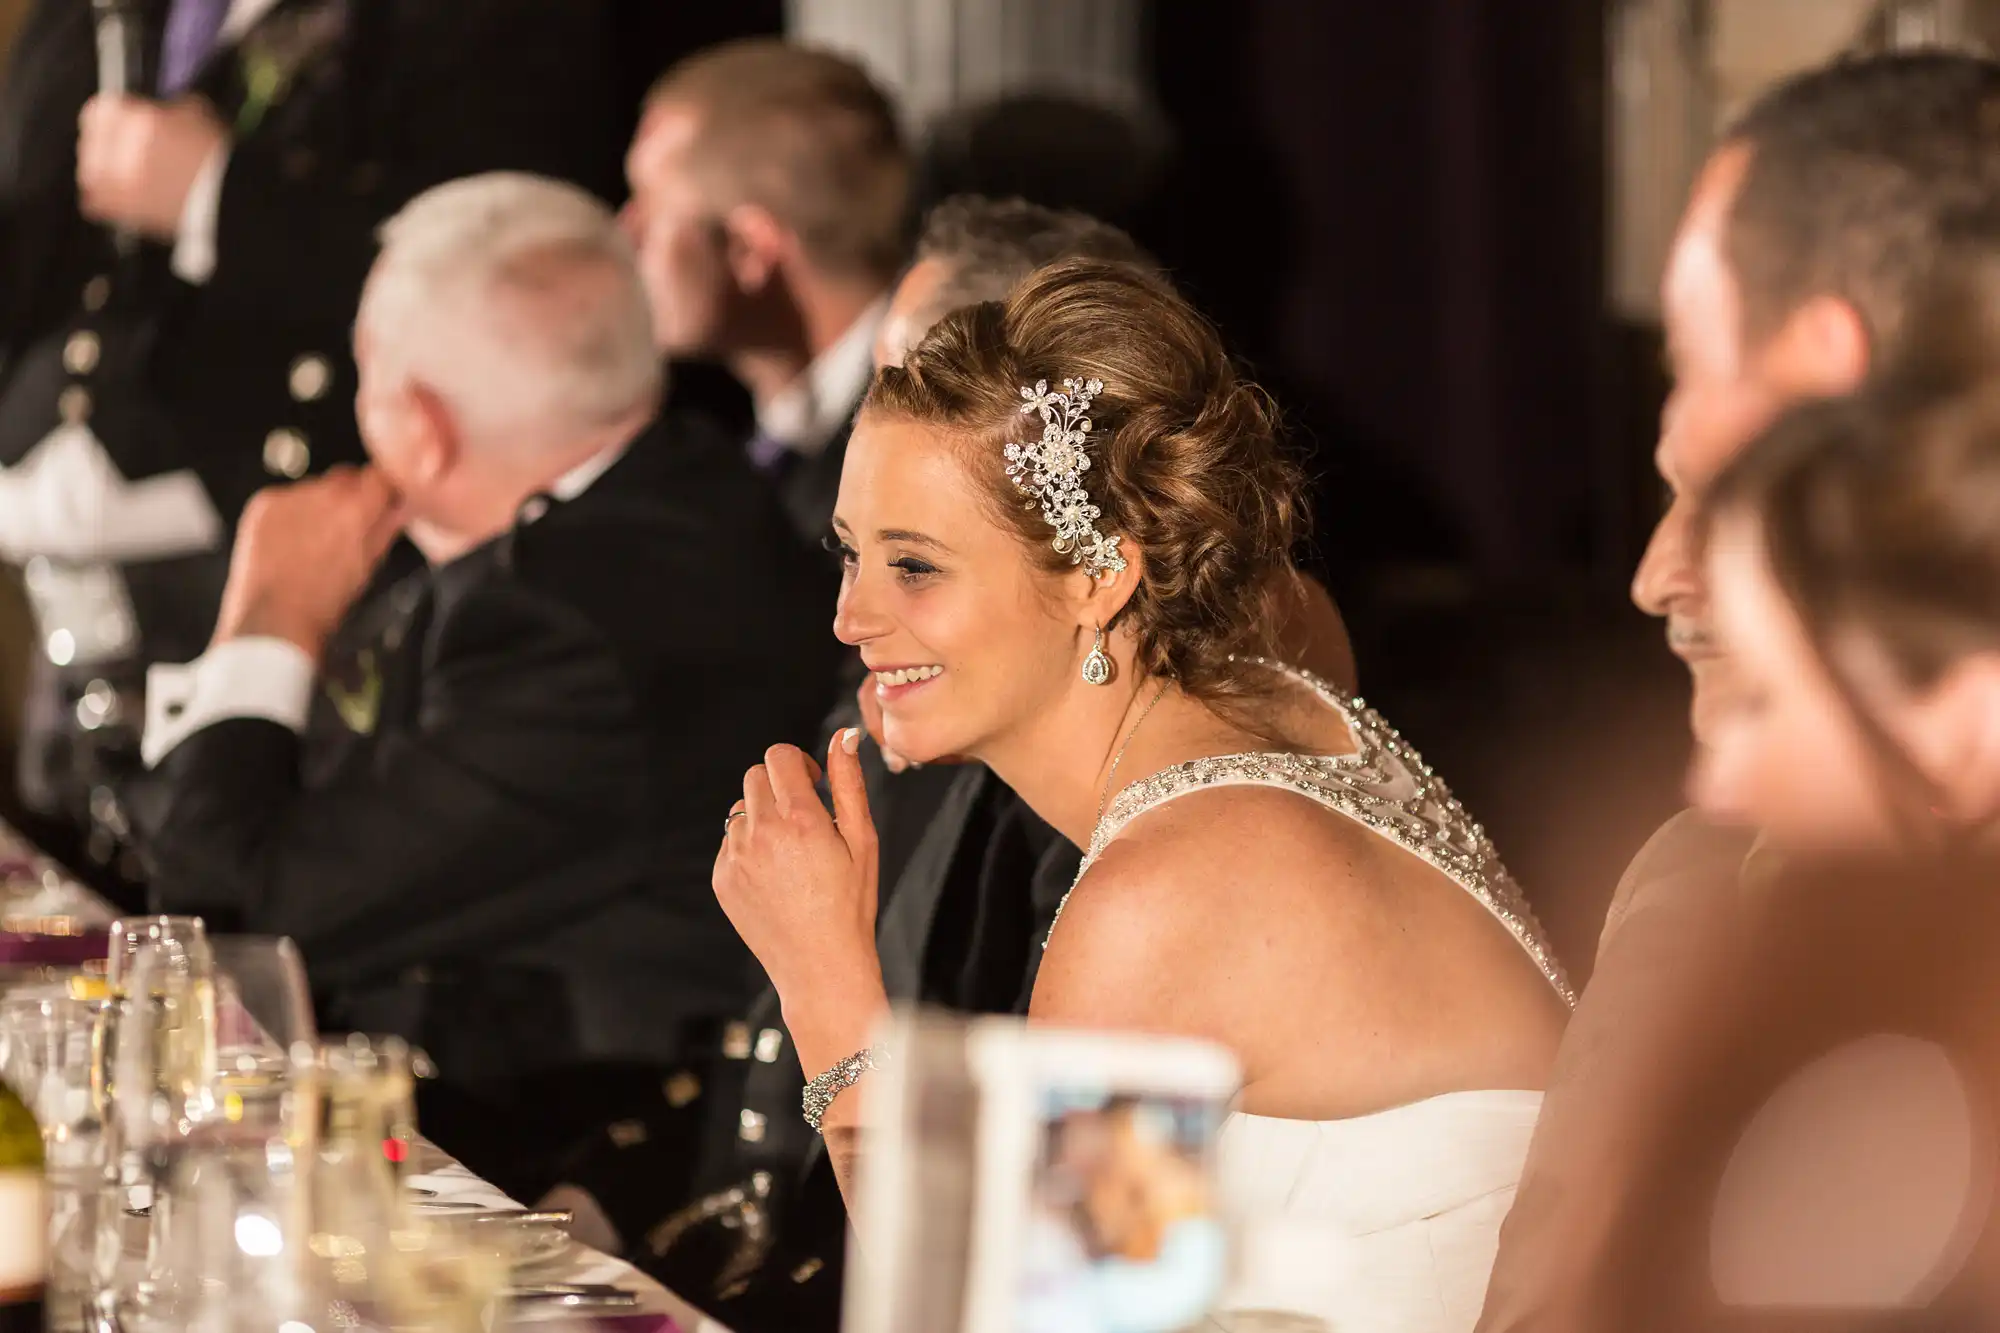 A bride in a beaded dress and floral hair accessory smiling during a banquet, with guests seated around her, blurred in the background.